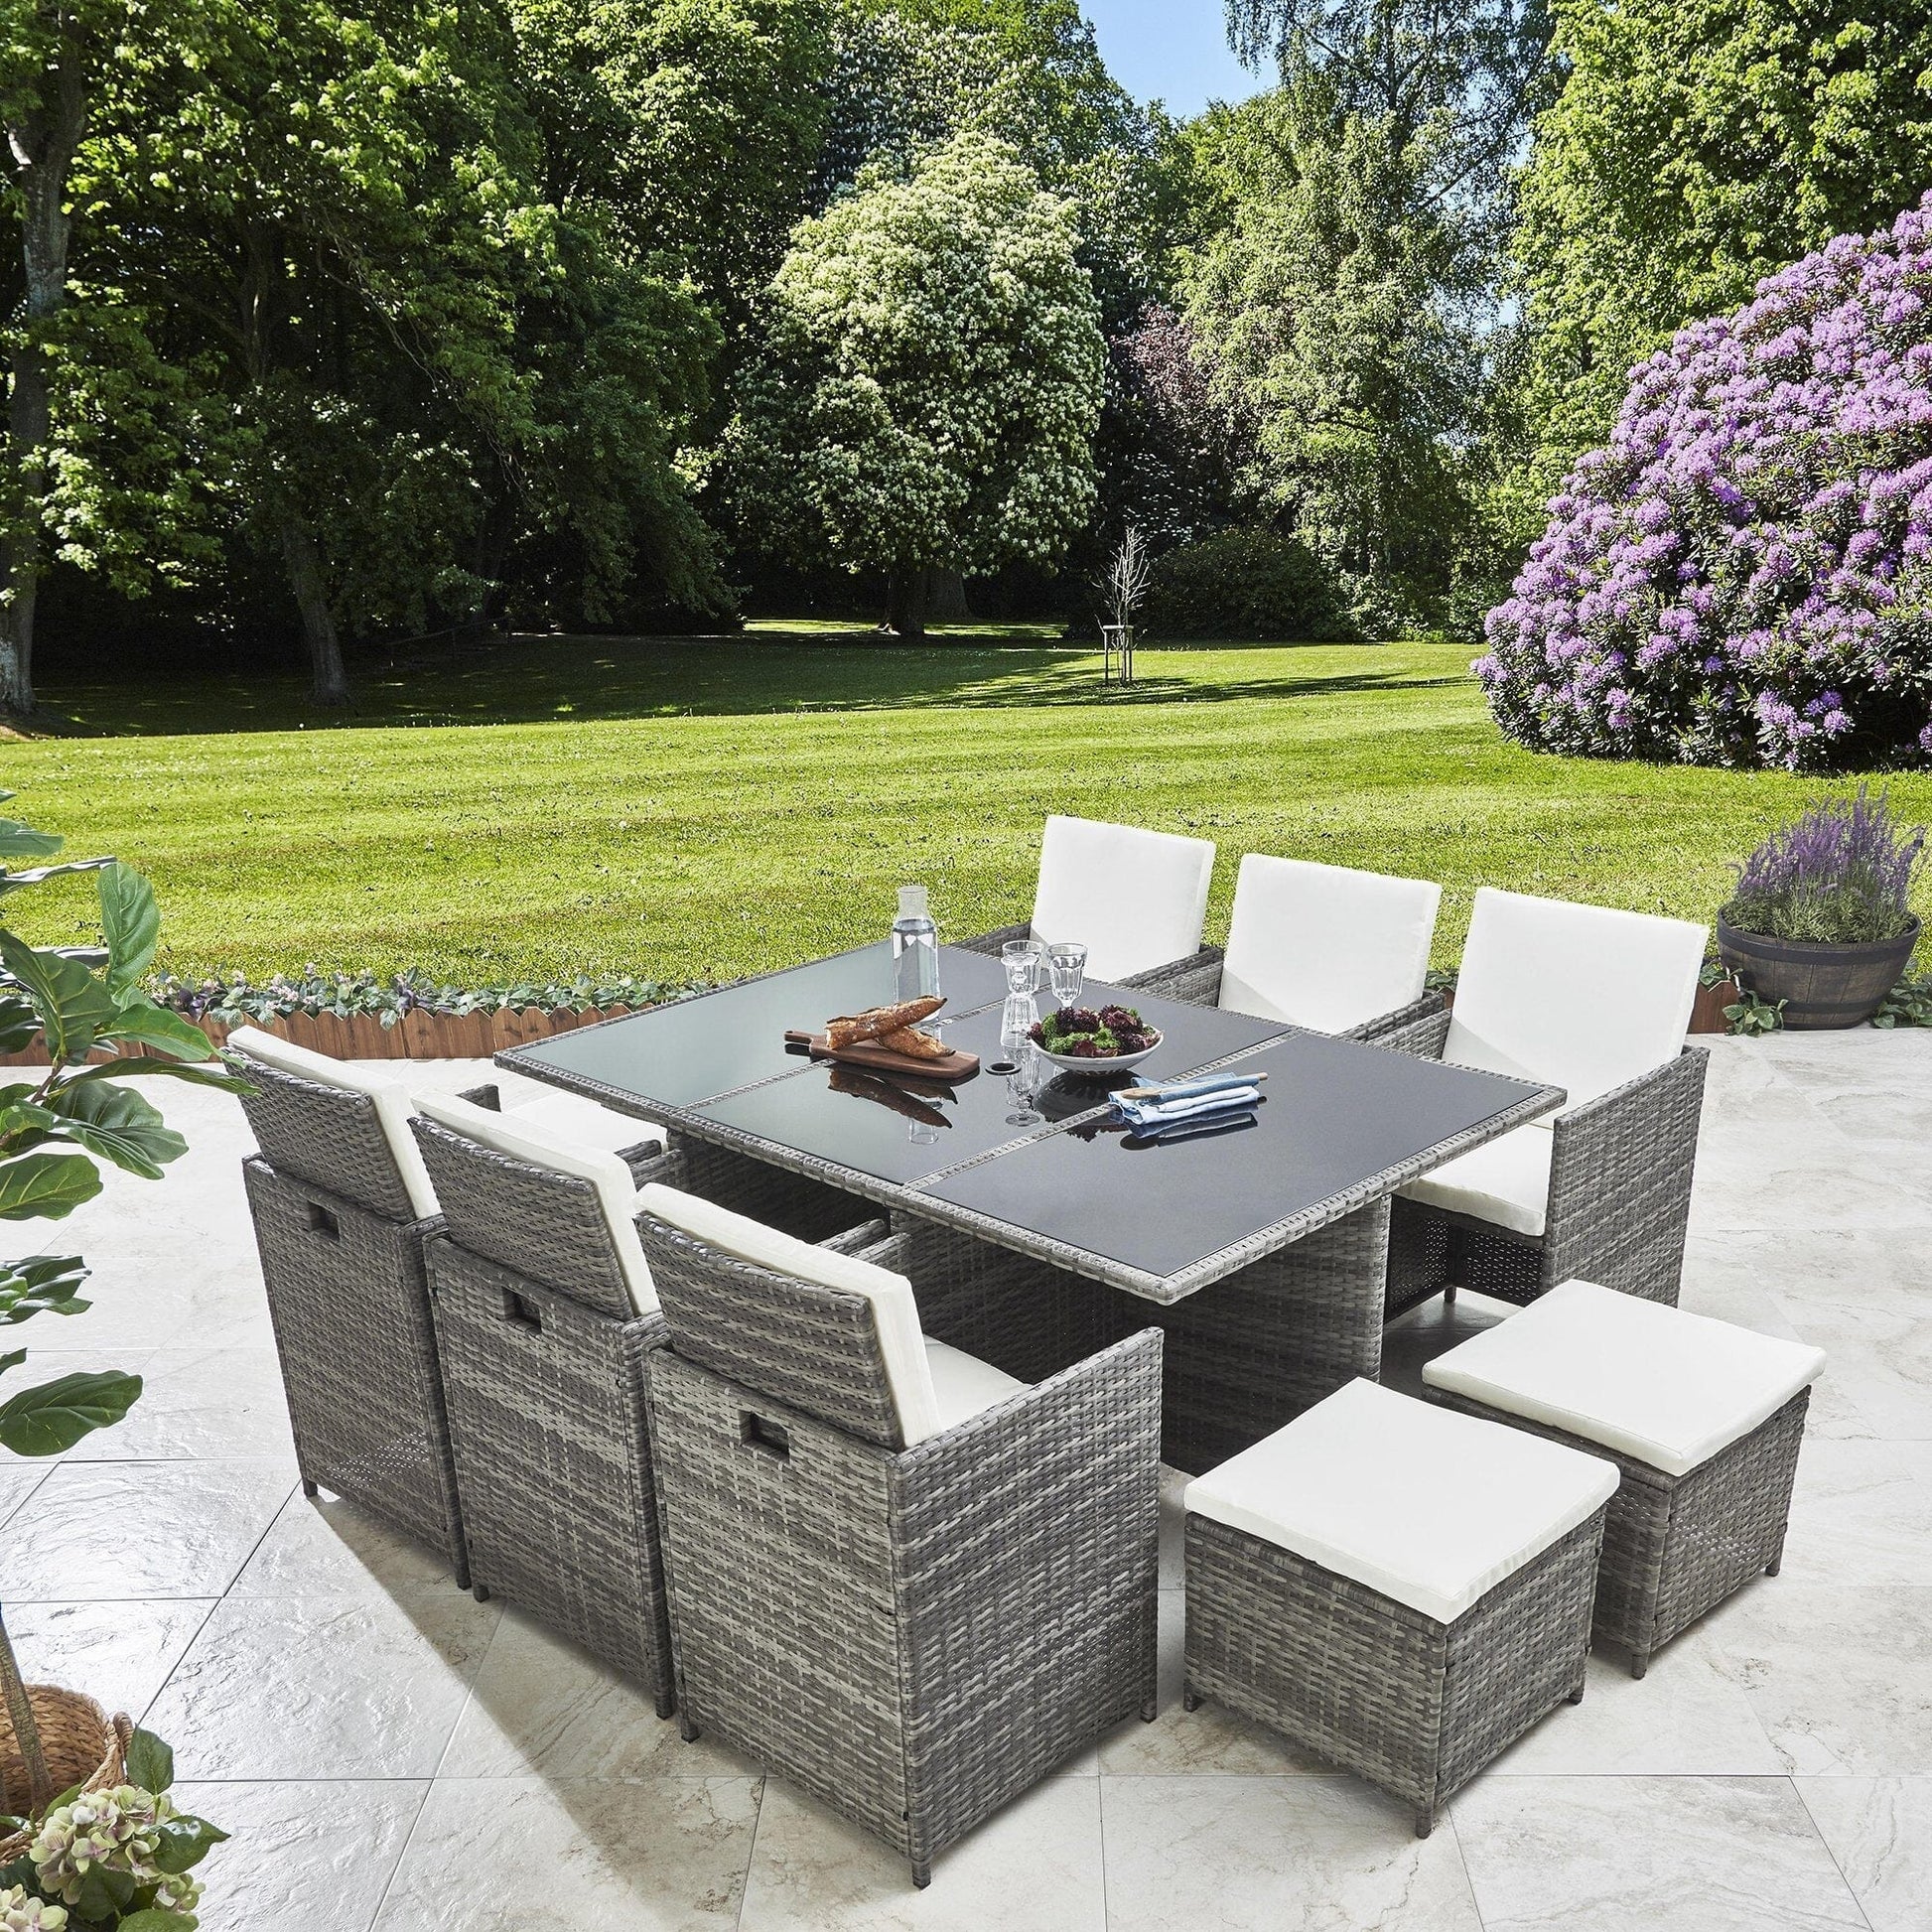 10 Seater Rattan Cube Garden Set with Cream Parasol - Outdoor Dining Furniture - (Grey Weave)